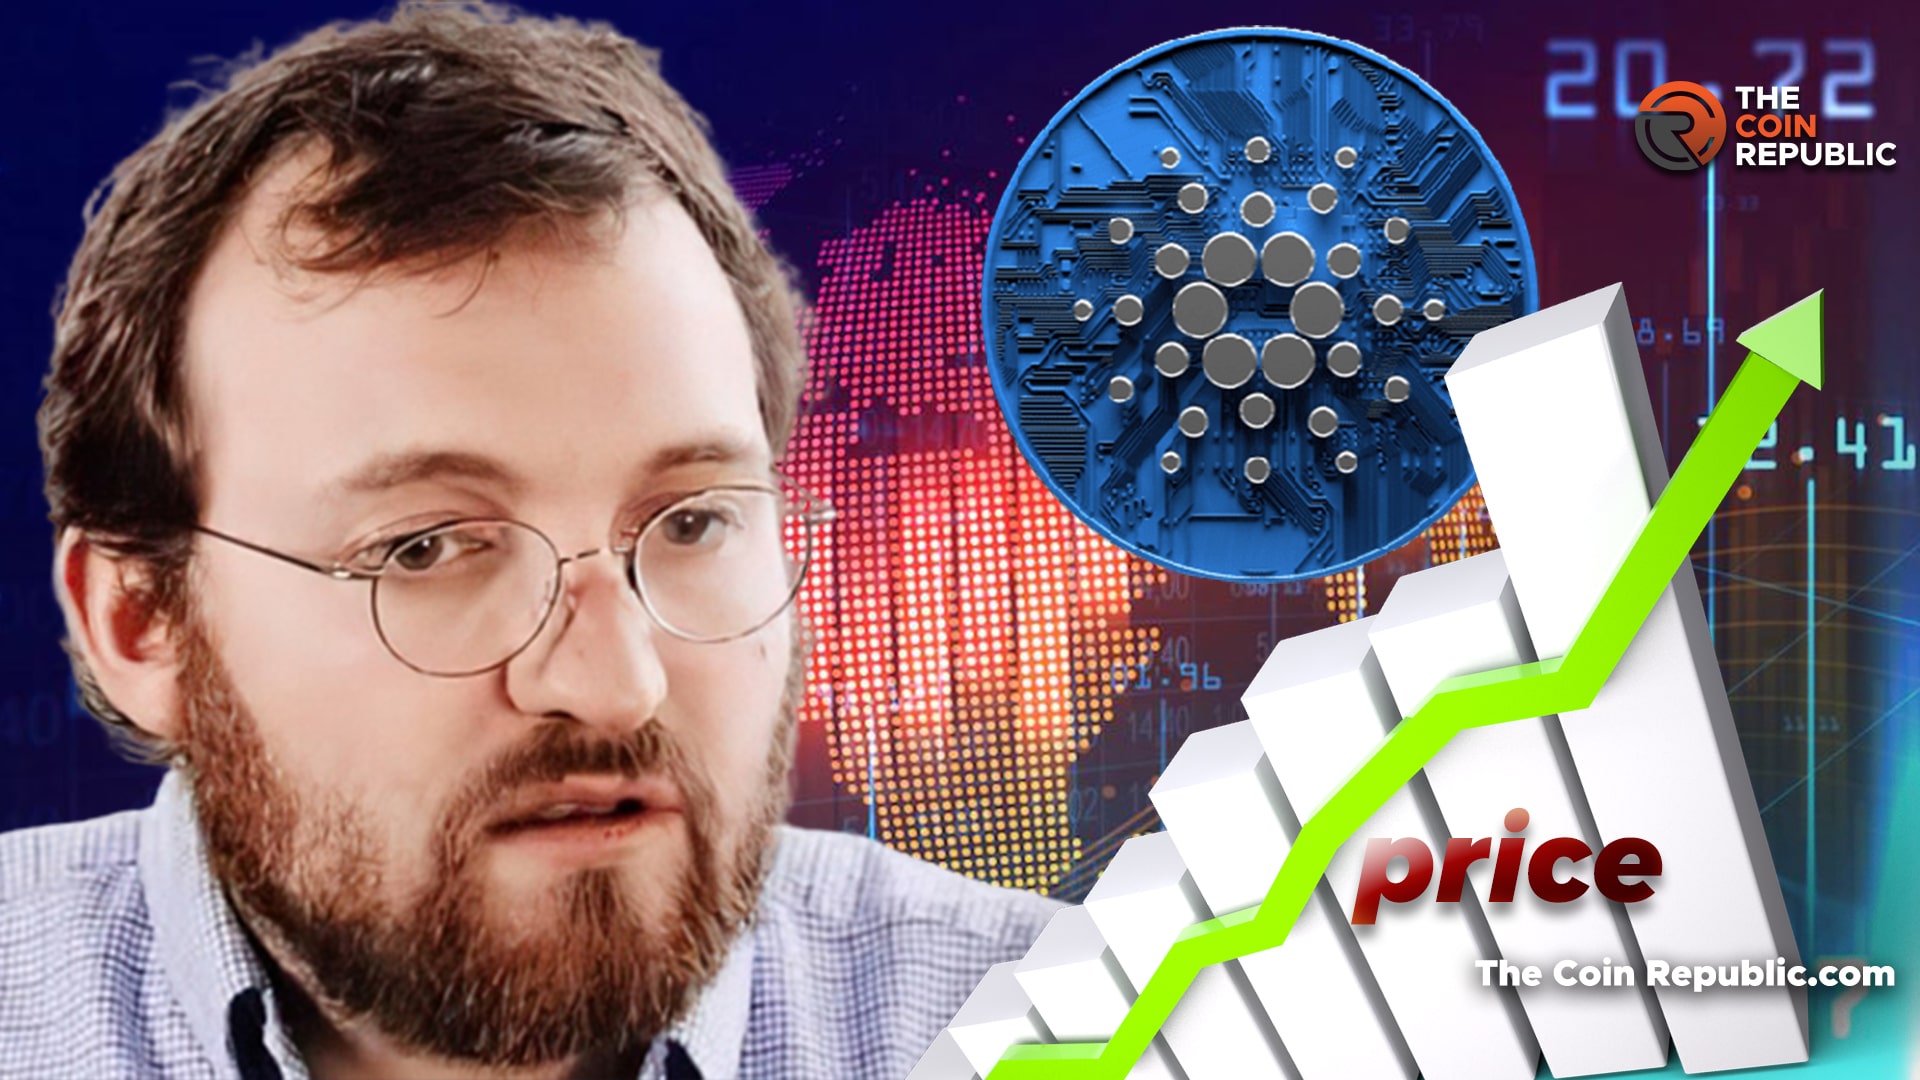 Man Complains to Cardano Founder About Drop in $ADA Price, Gets Schooled